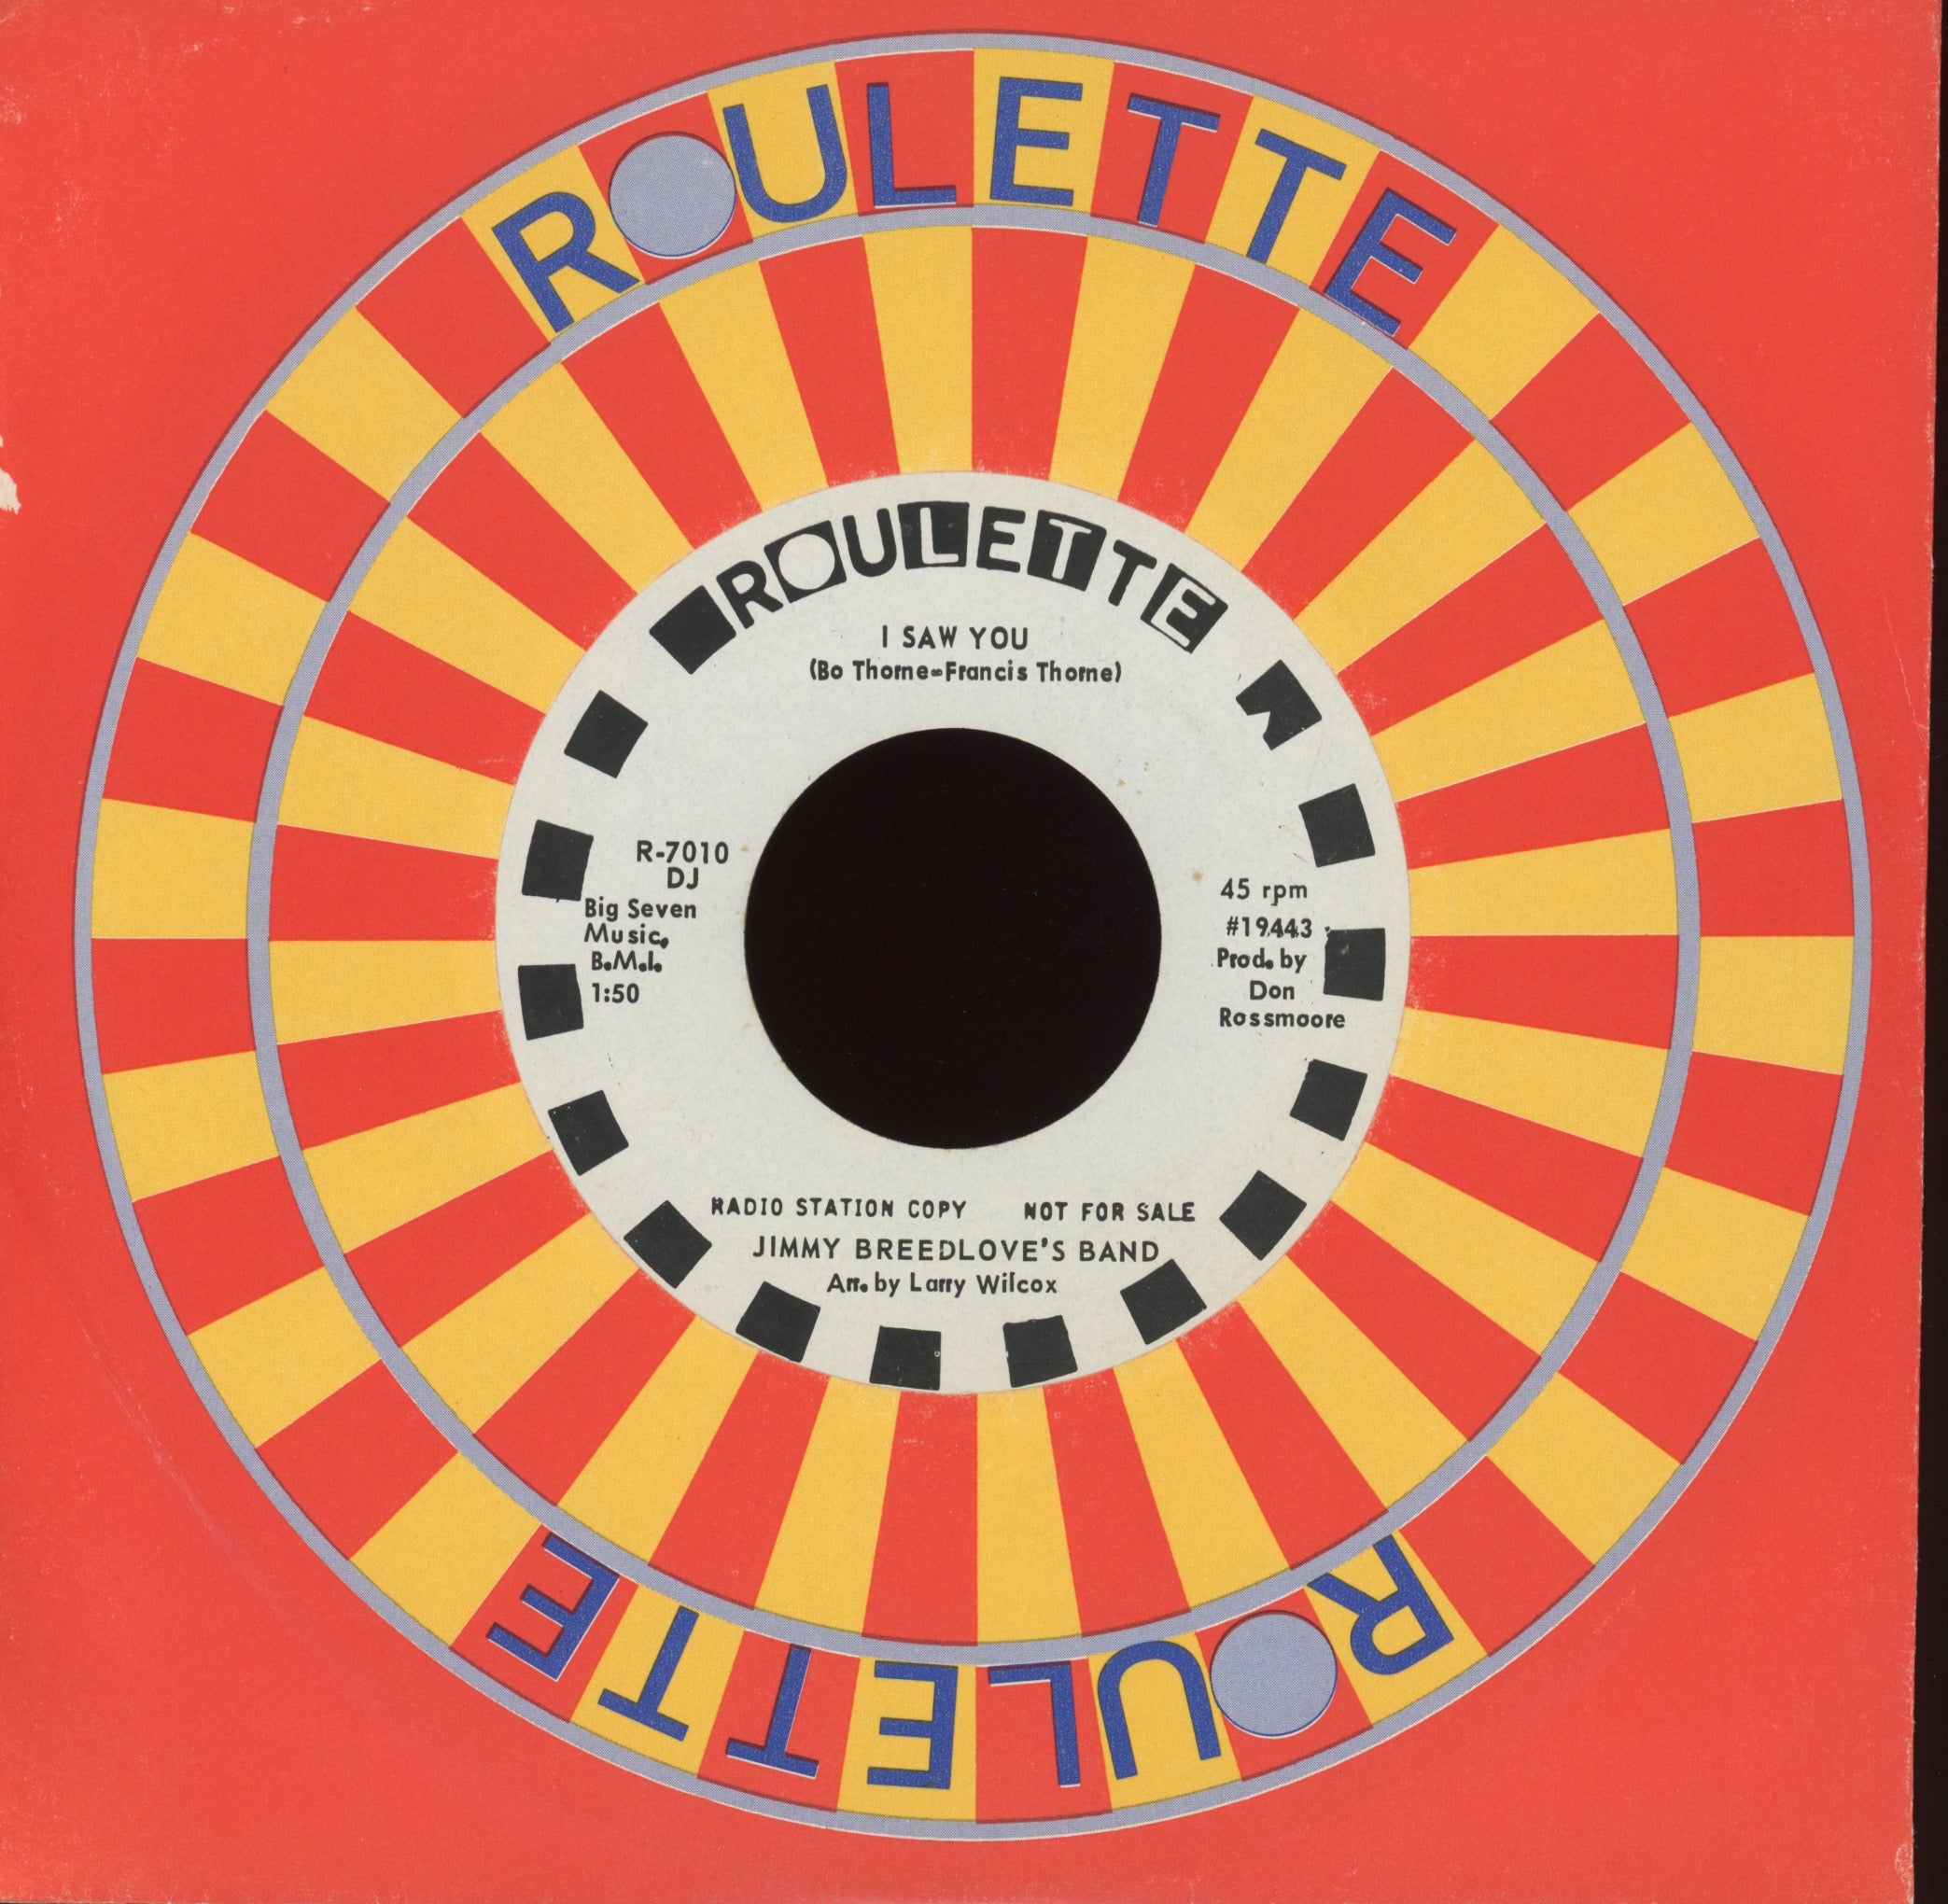 Jimmy Breedlove - I Can't Help Lovin' You on Roulette Promo Northern Soul 45